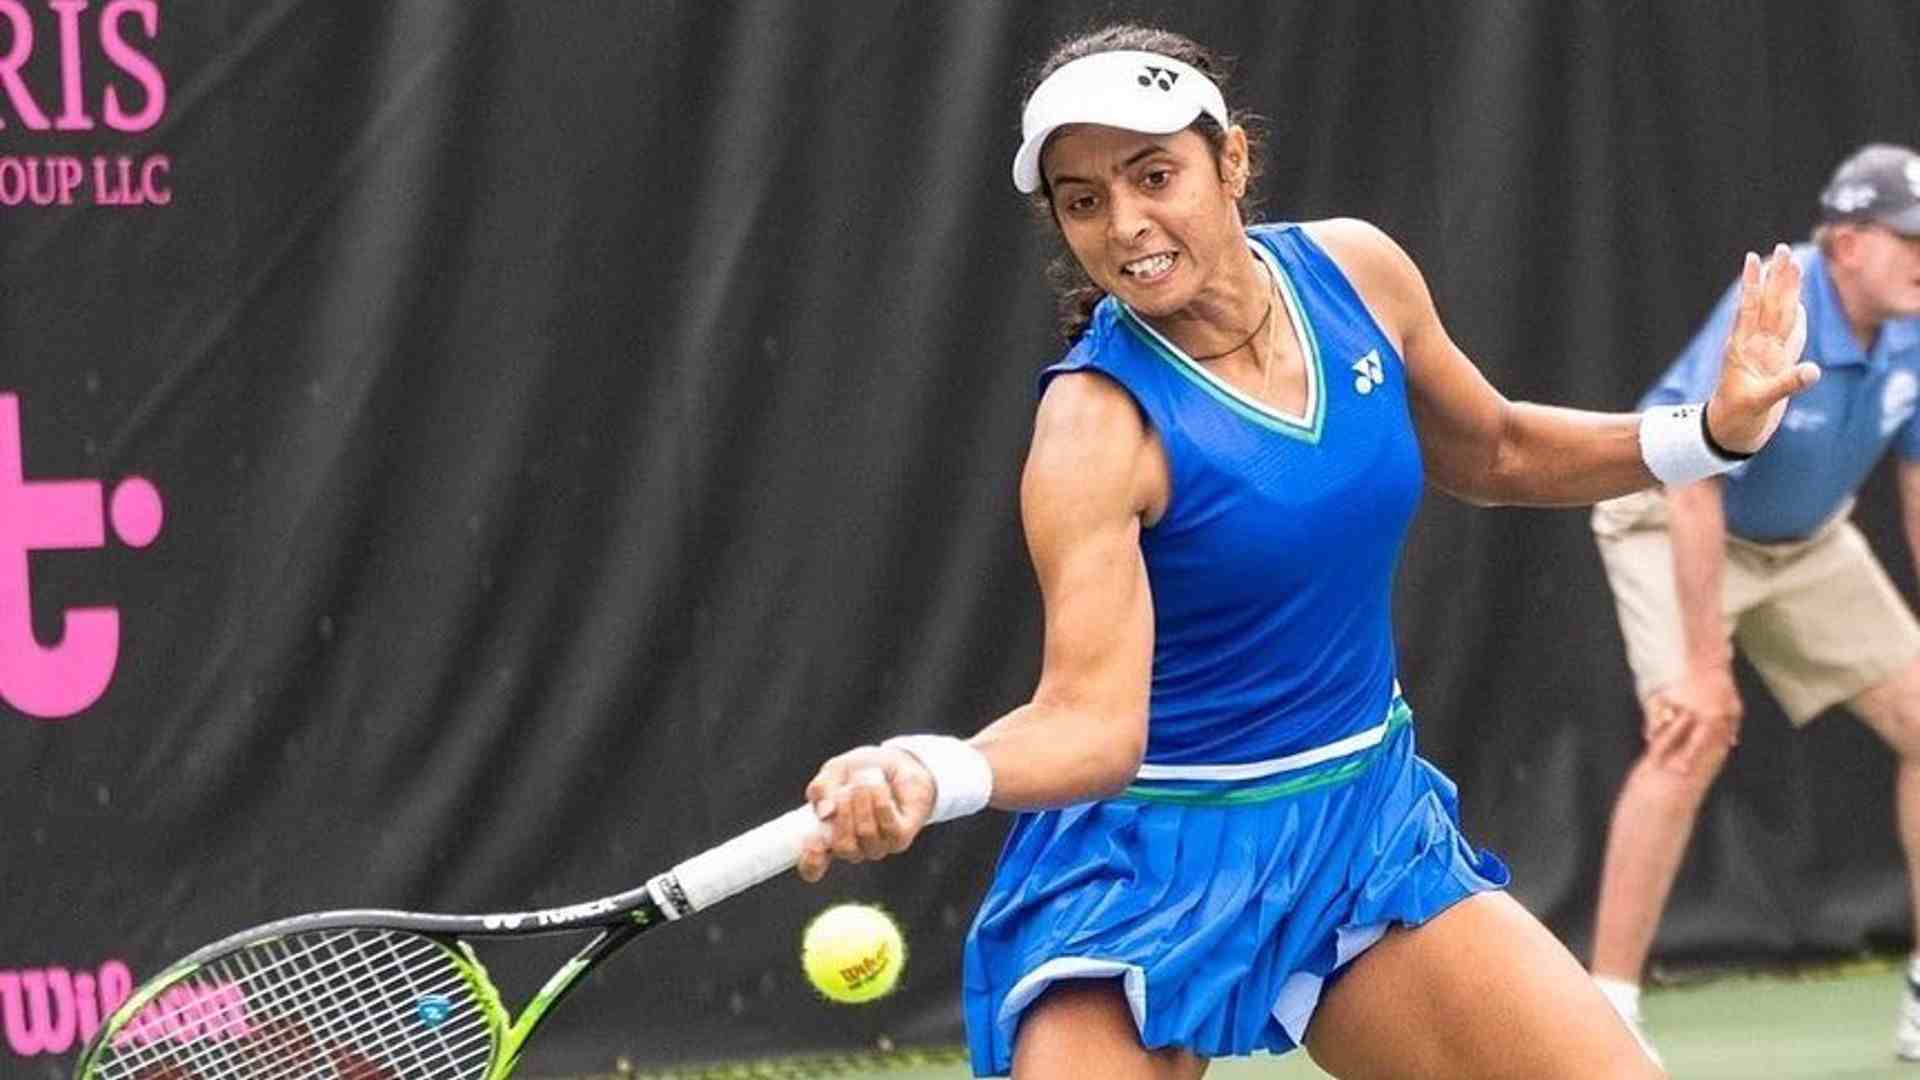 Indian tennis player Ankita Raina is seeded second. (Image: Twitter)